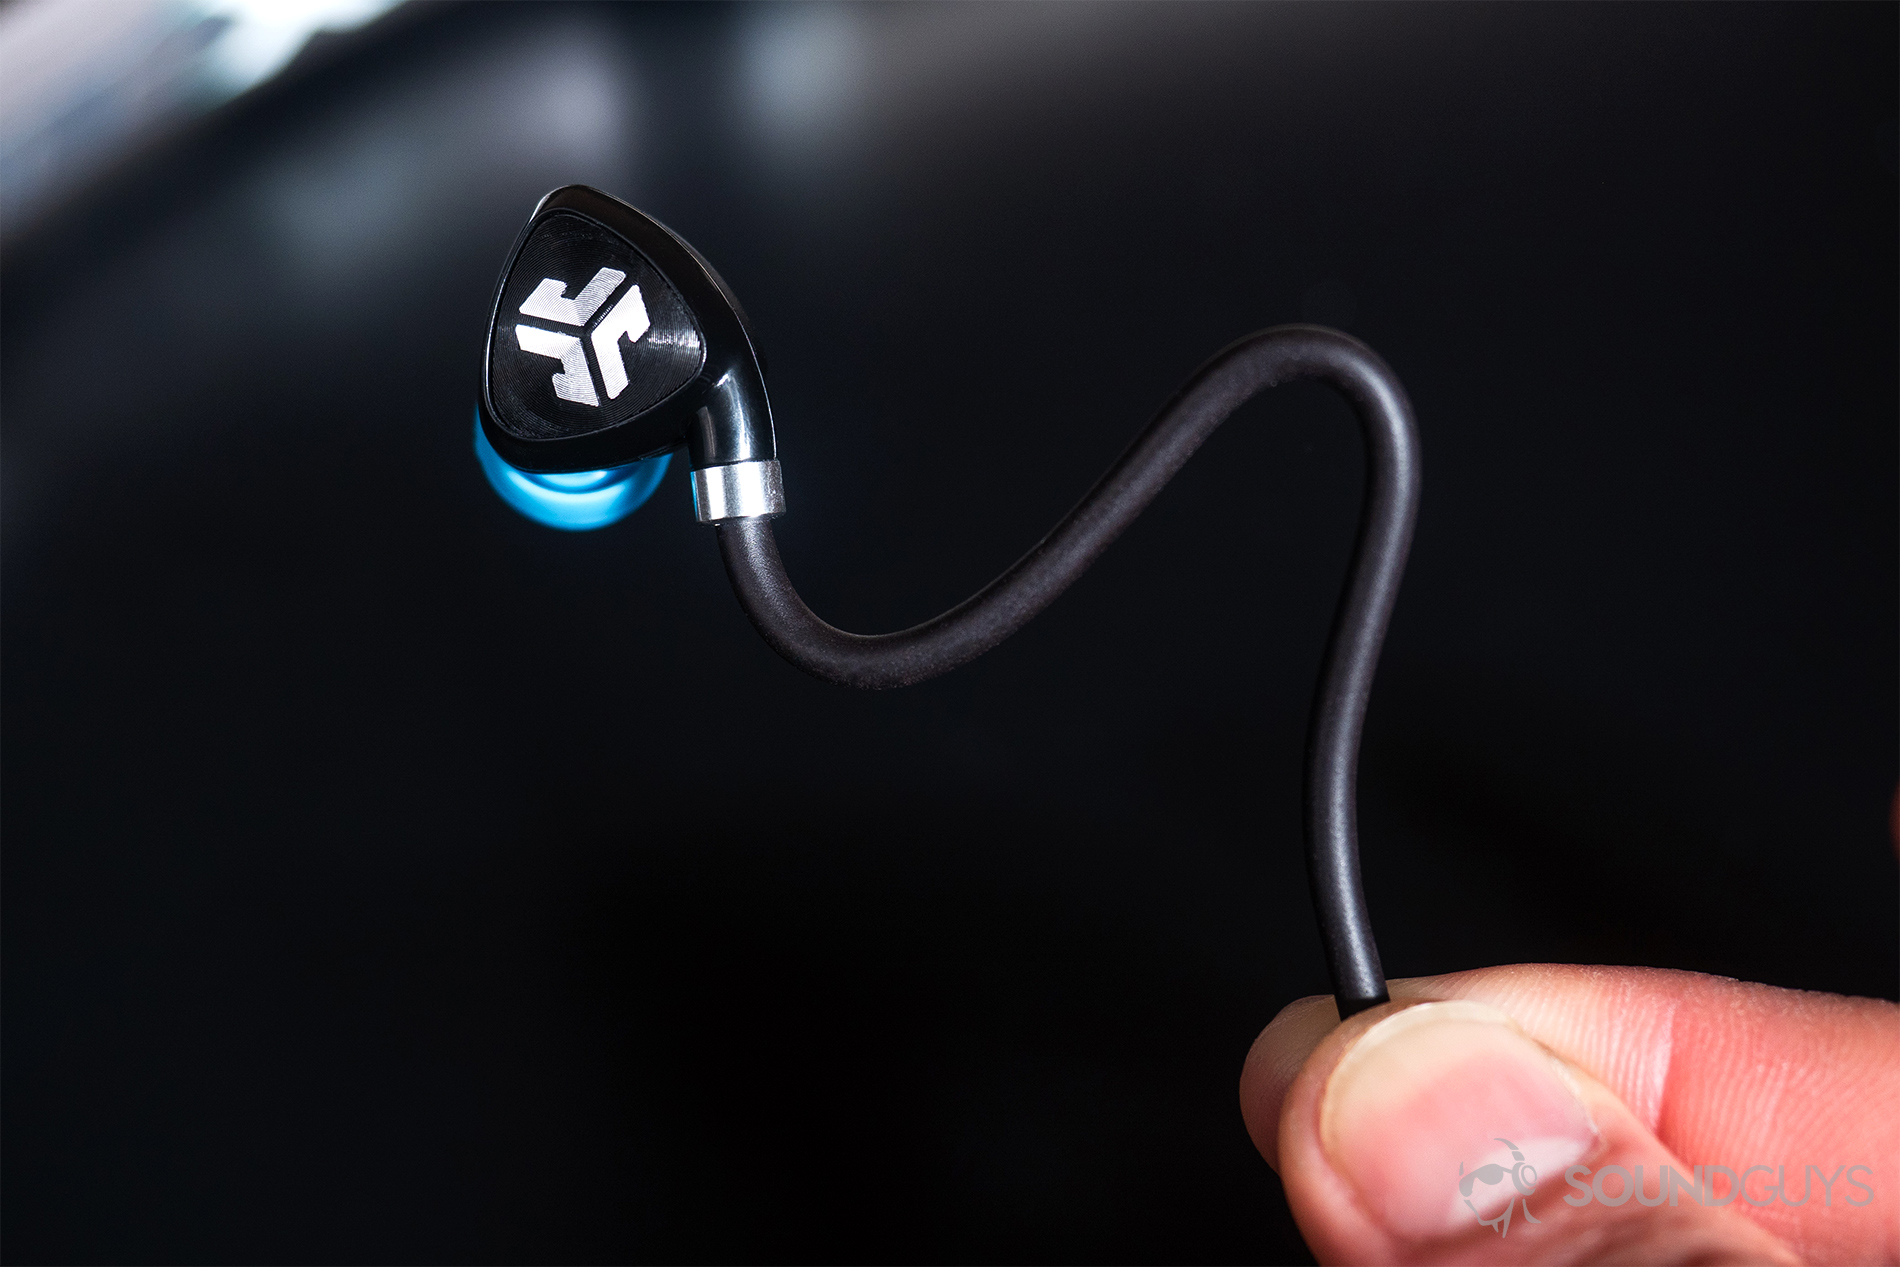 JLab Fit Sport Wireless: The malleable wire extending from the earbud housing is stiff enough to hold its shape while remaining flexible.